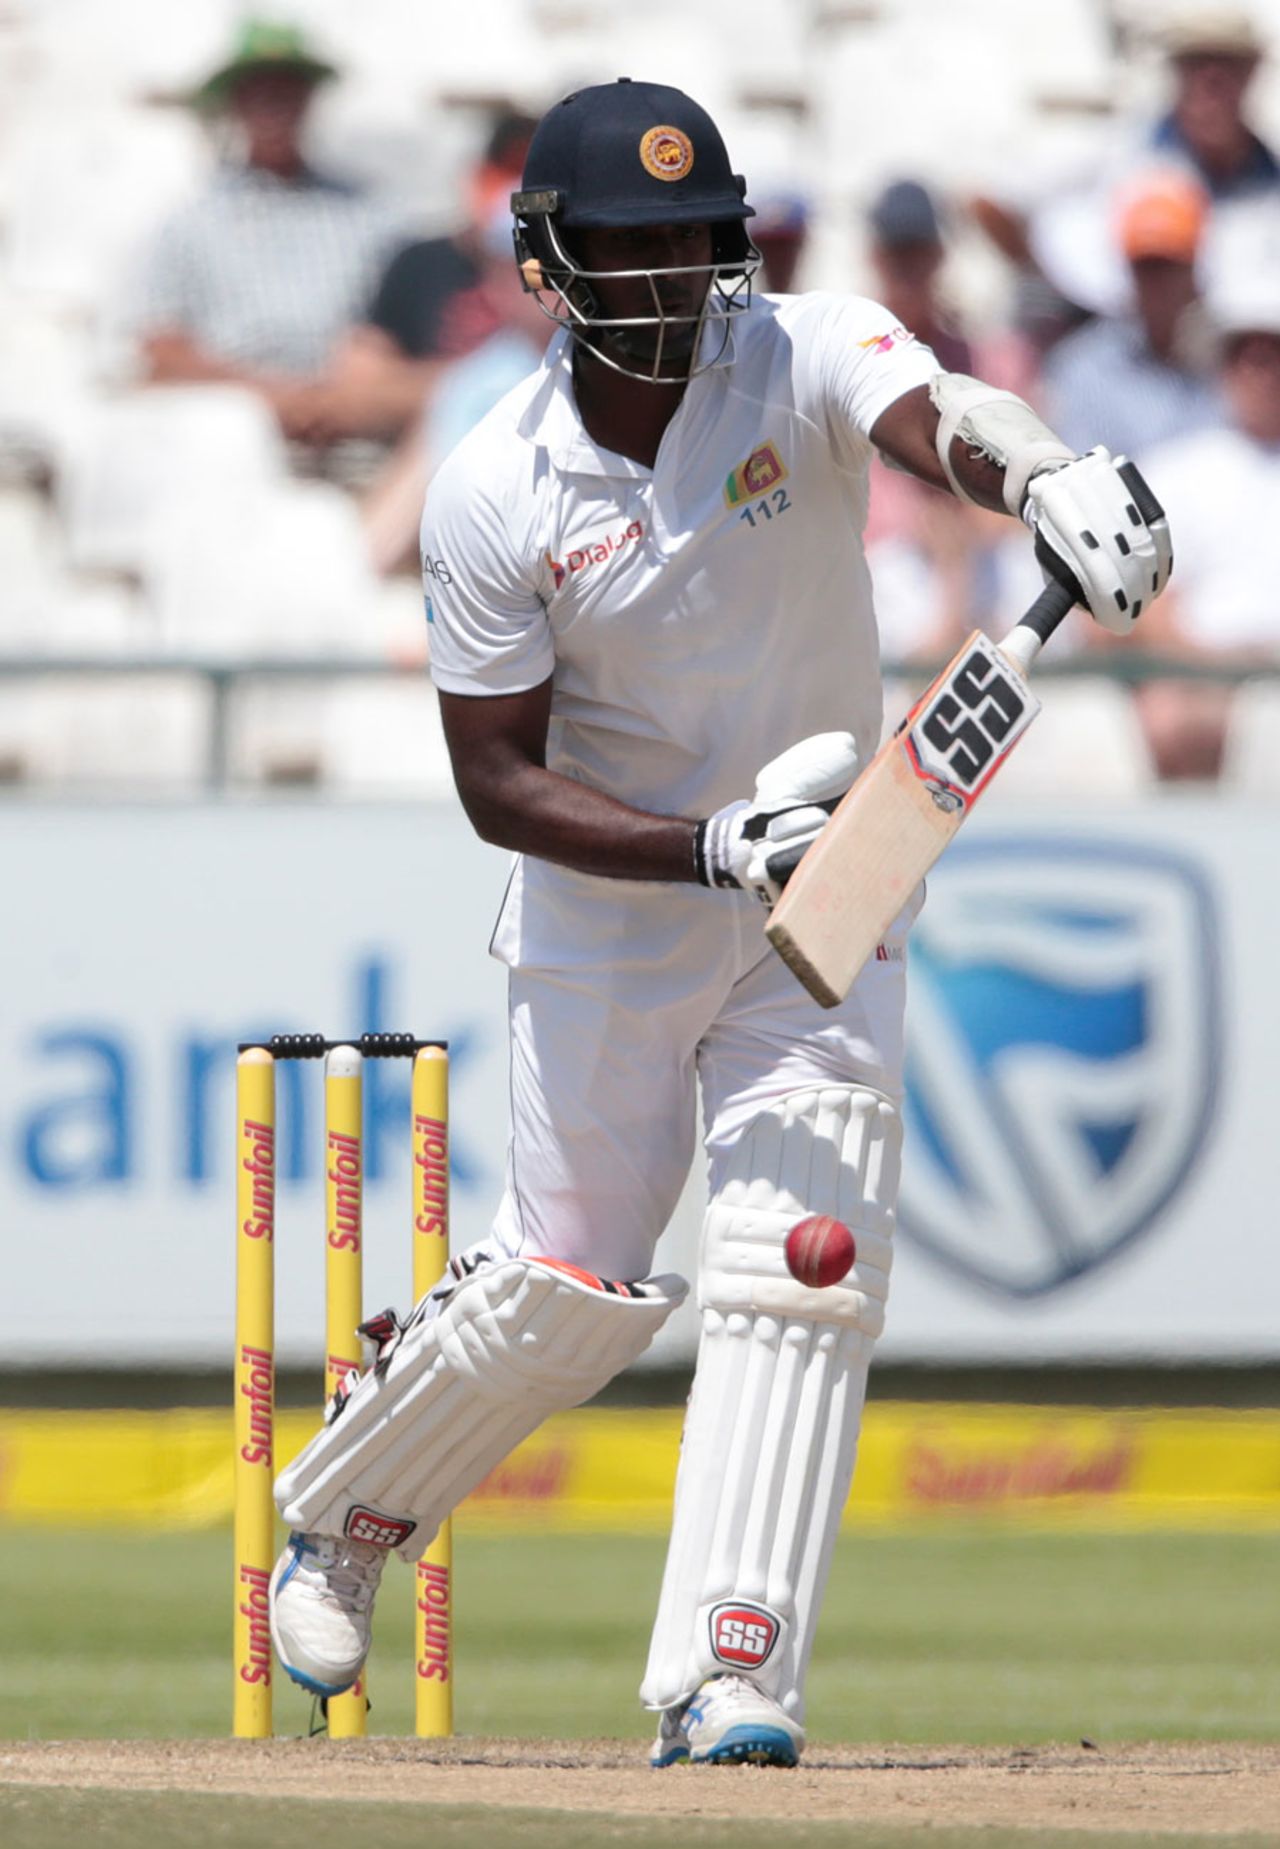 Angelo Mathews fends the ball away, South Africa v Sri Lanka, 2nd Test, Cape Town, 4th day, January 5, 2017